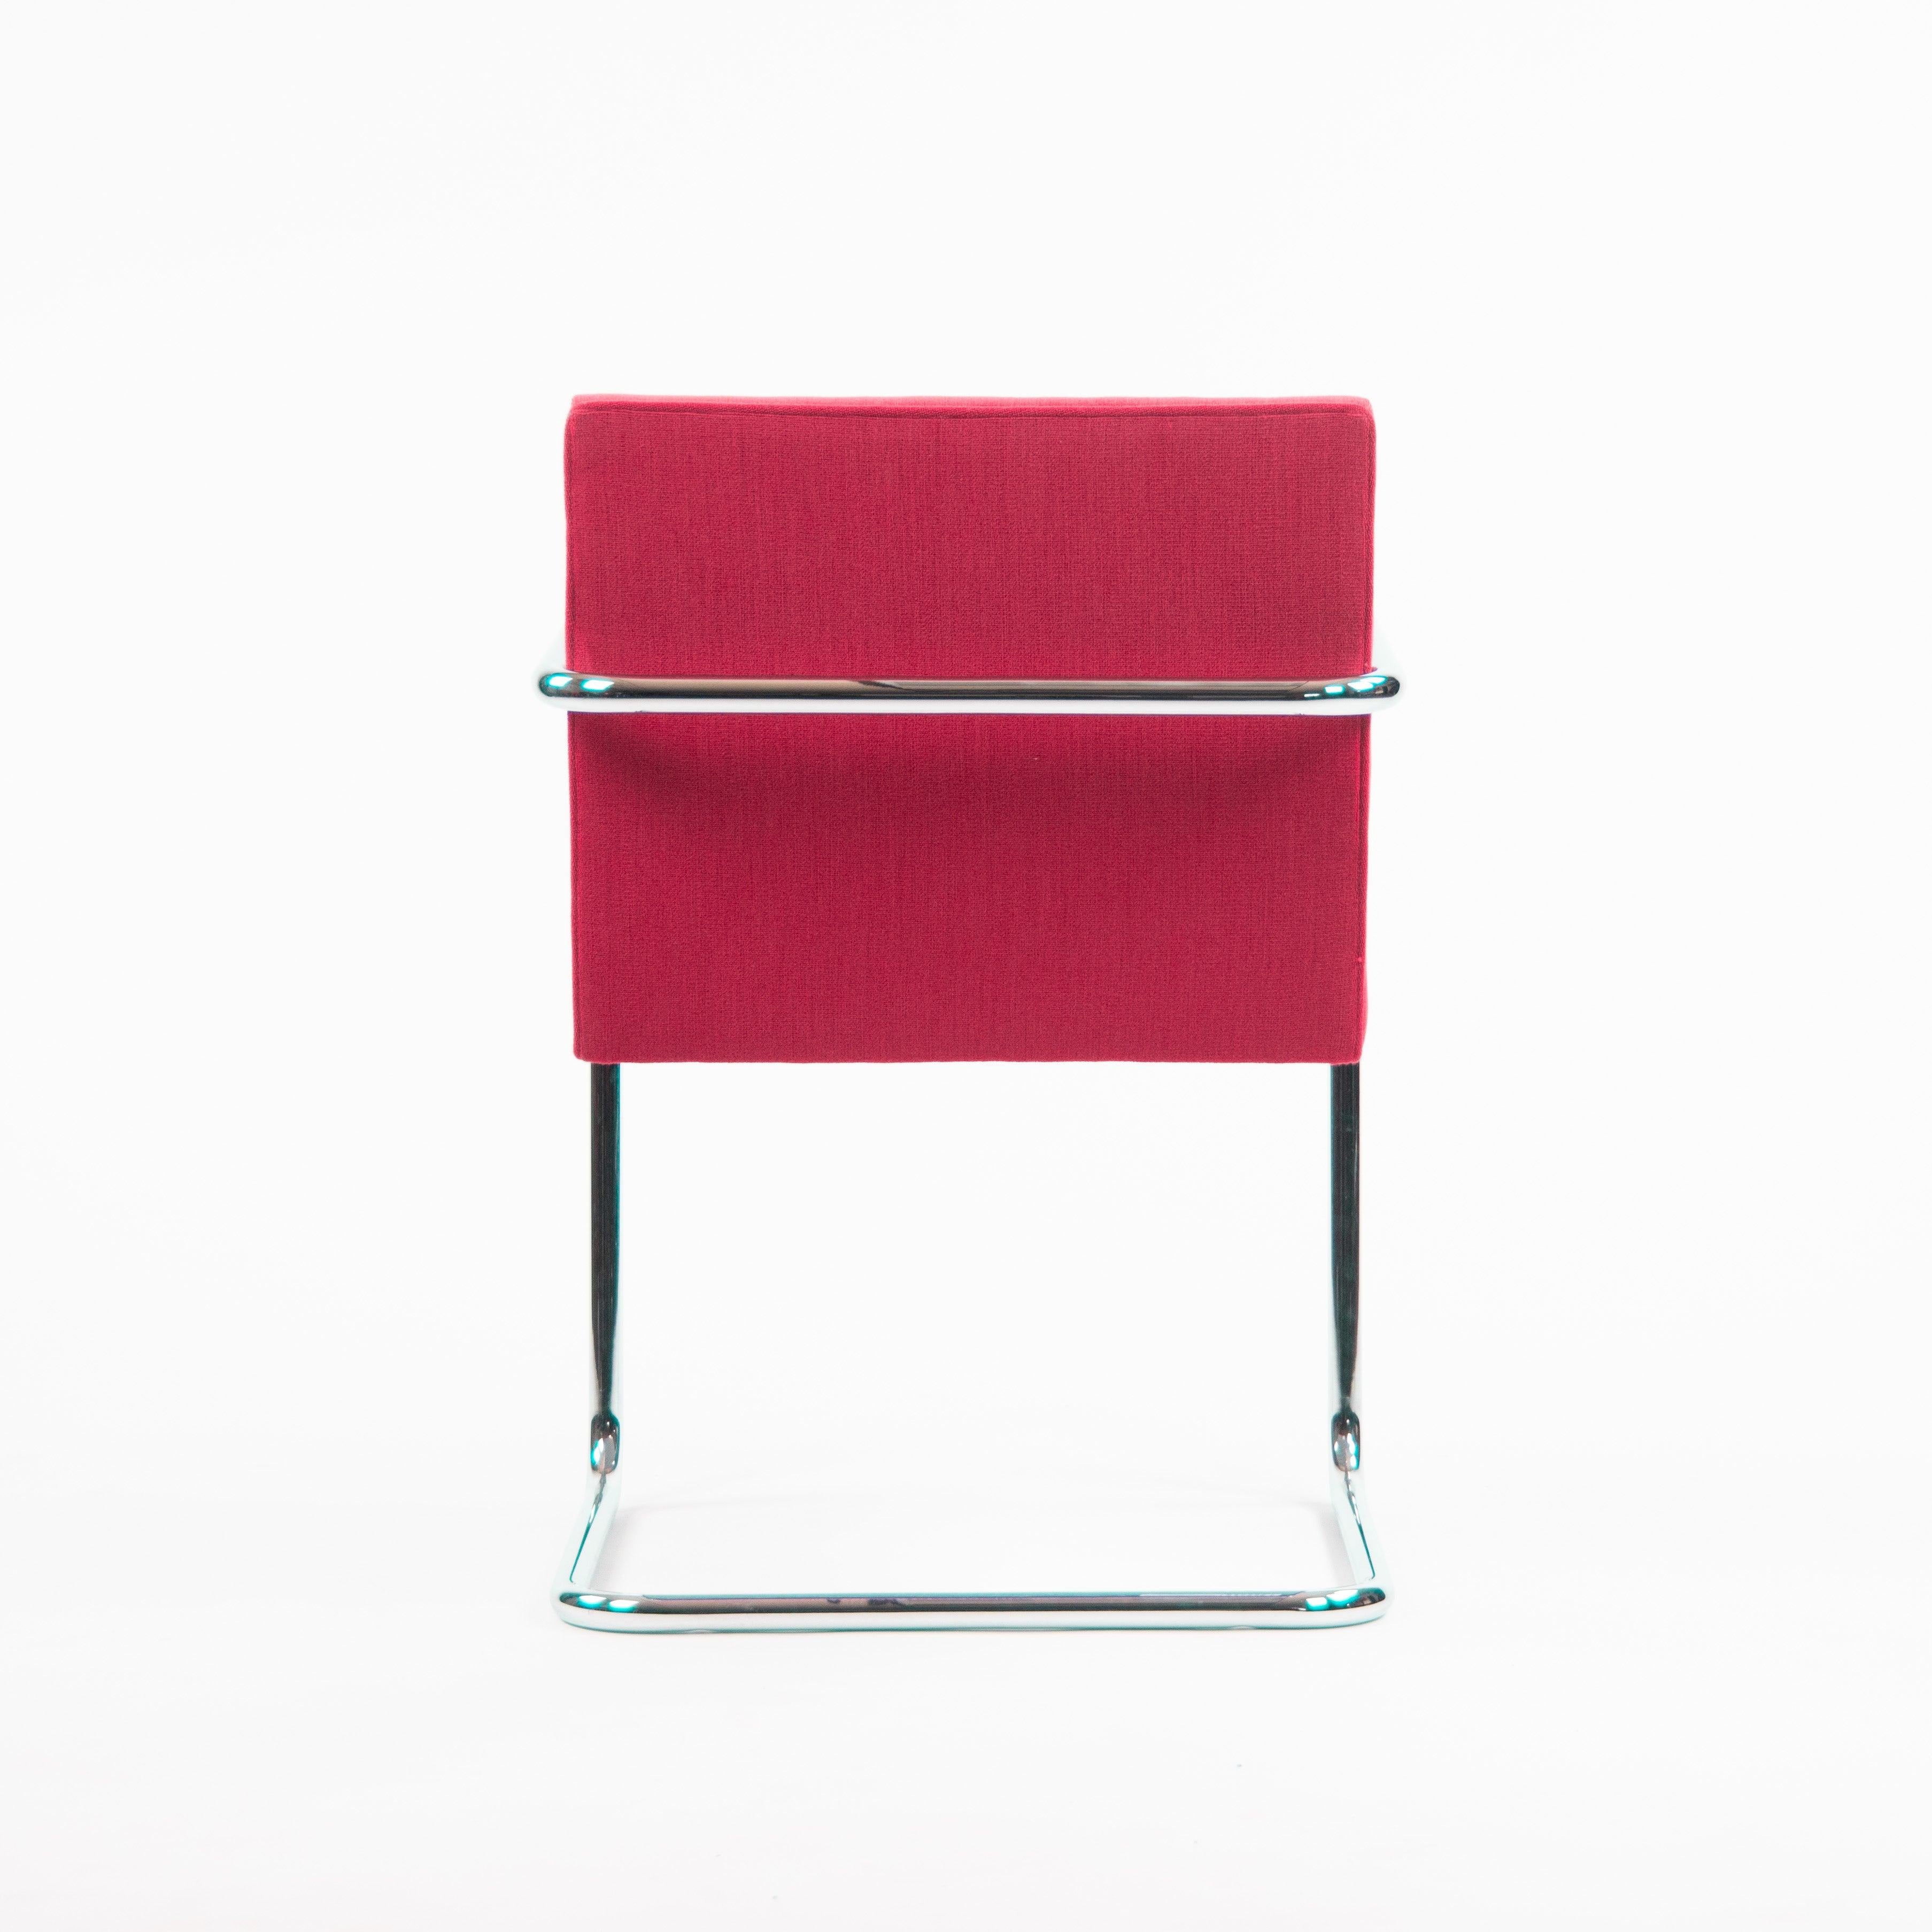 Contemporary 2010 Mies van der Rohe for Knoll Brno Tubular Chrome Dining / Arm Chairs For Sale